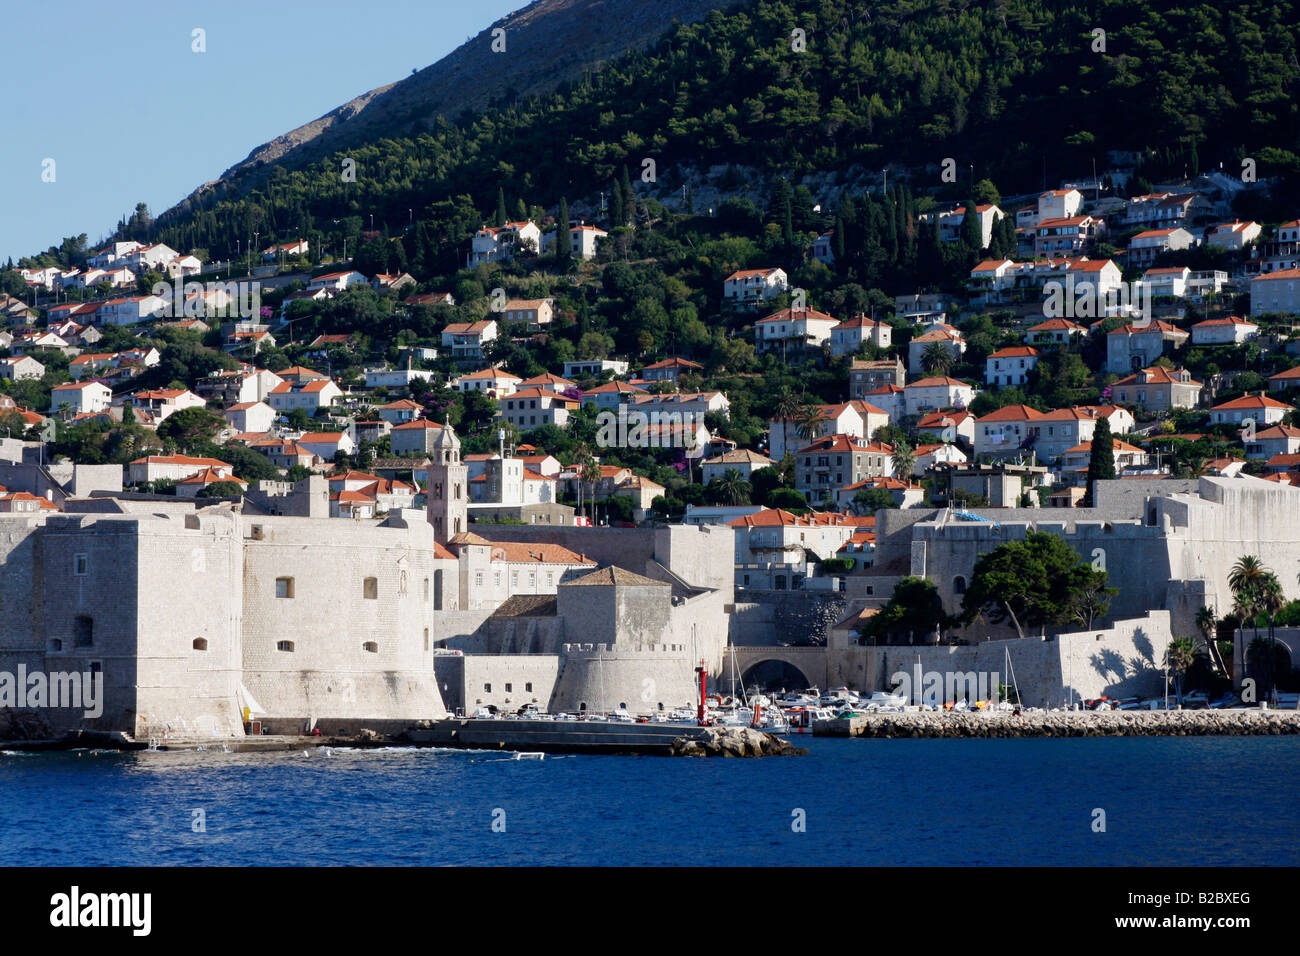 The port of Dubrovnik on the Adriatic Sea. Stock Photo